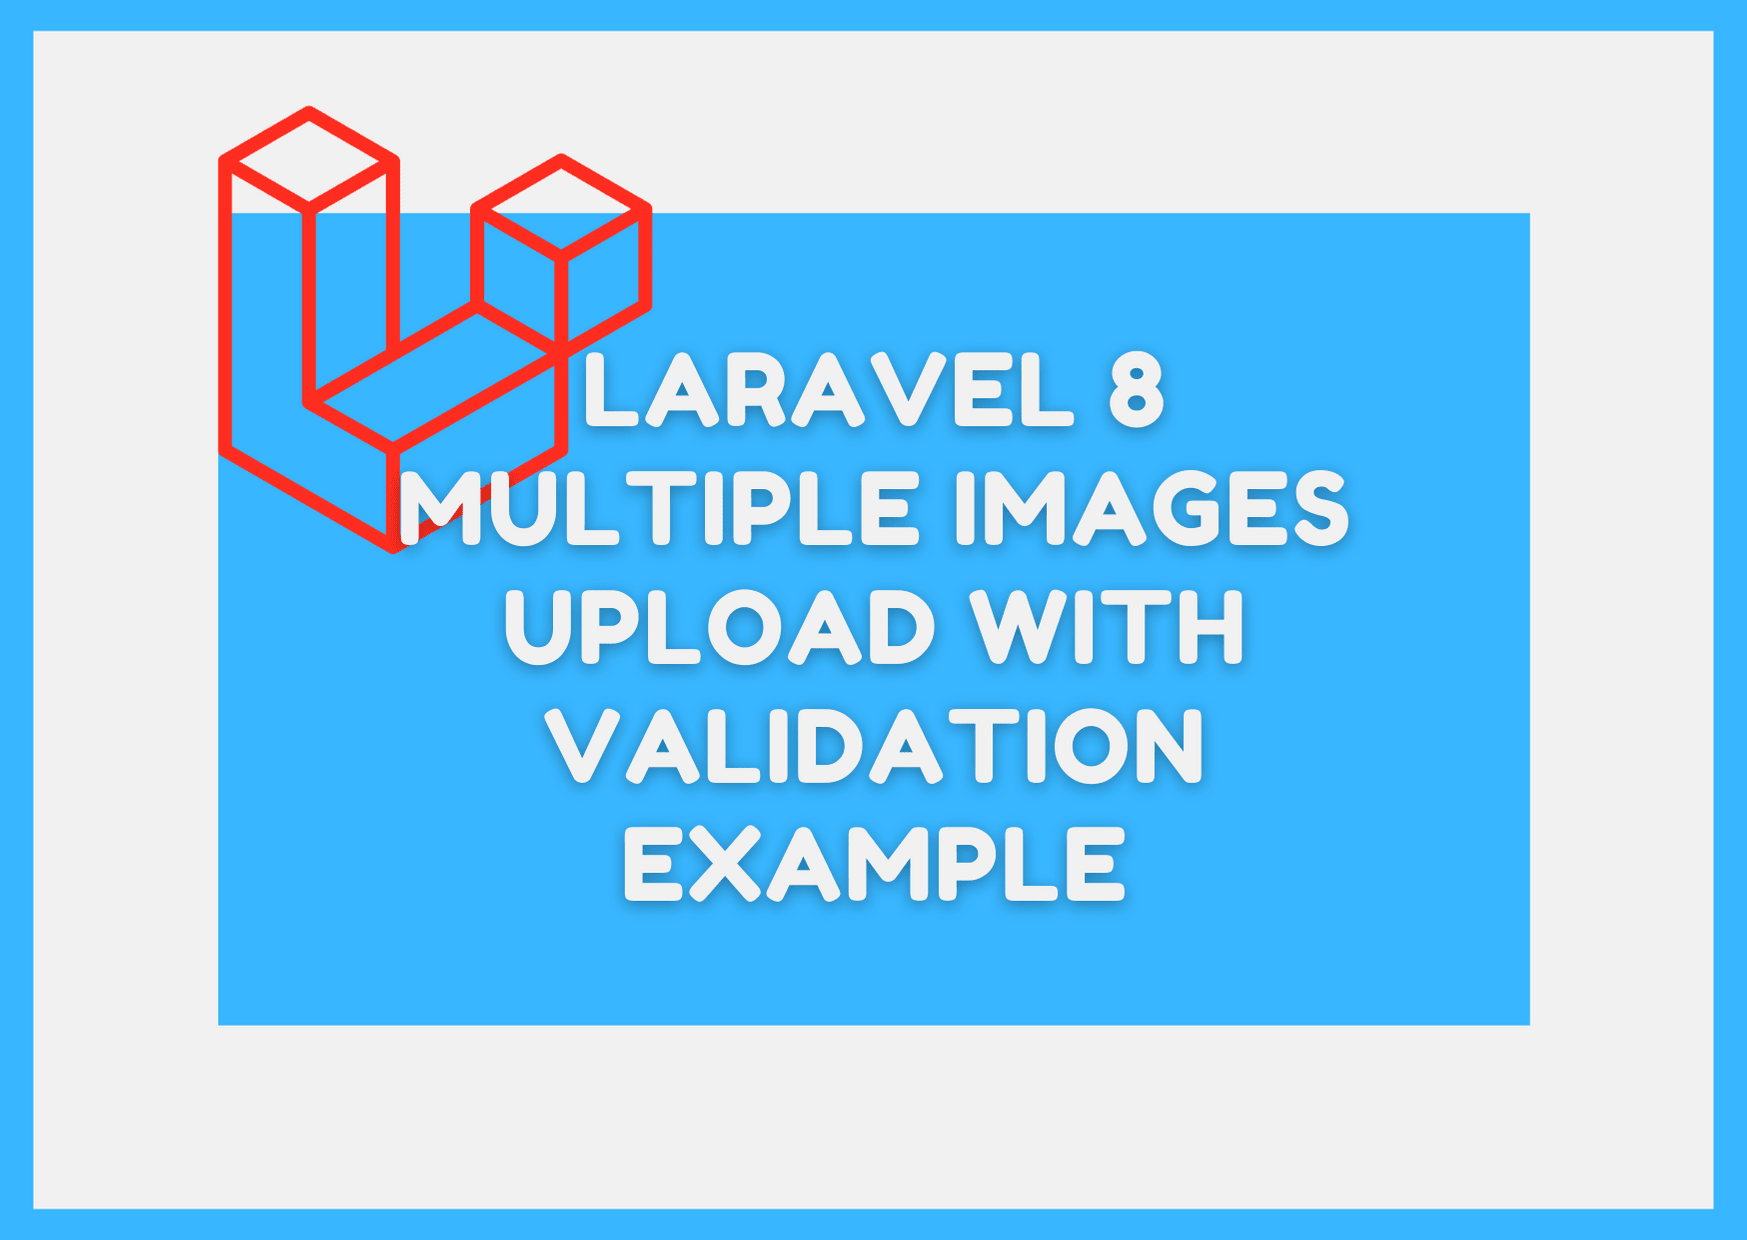 Laravel 8 Multiple Images Upload with Validation Example - Step by Step